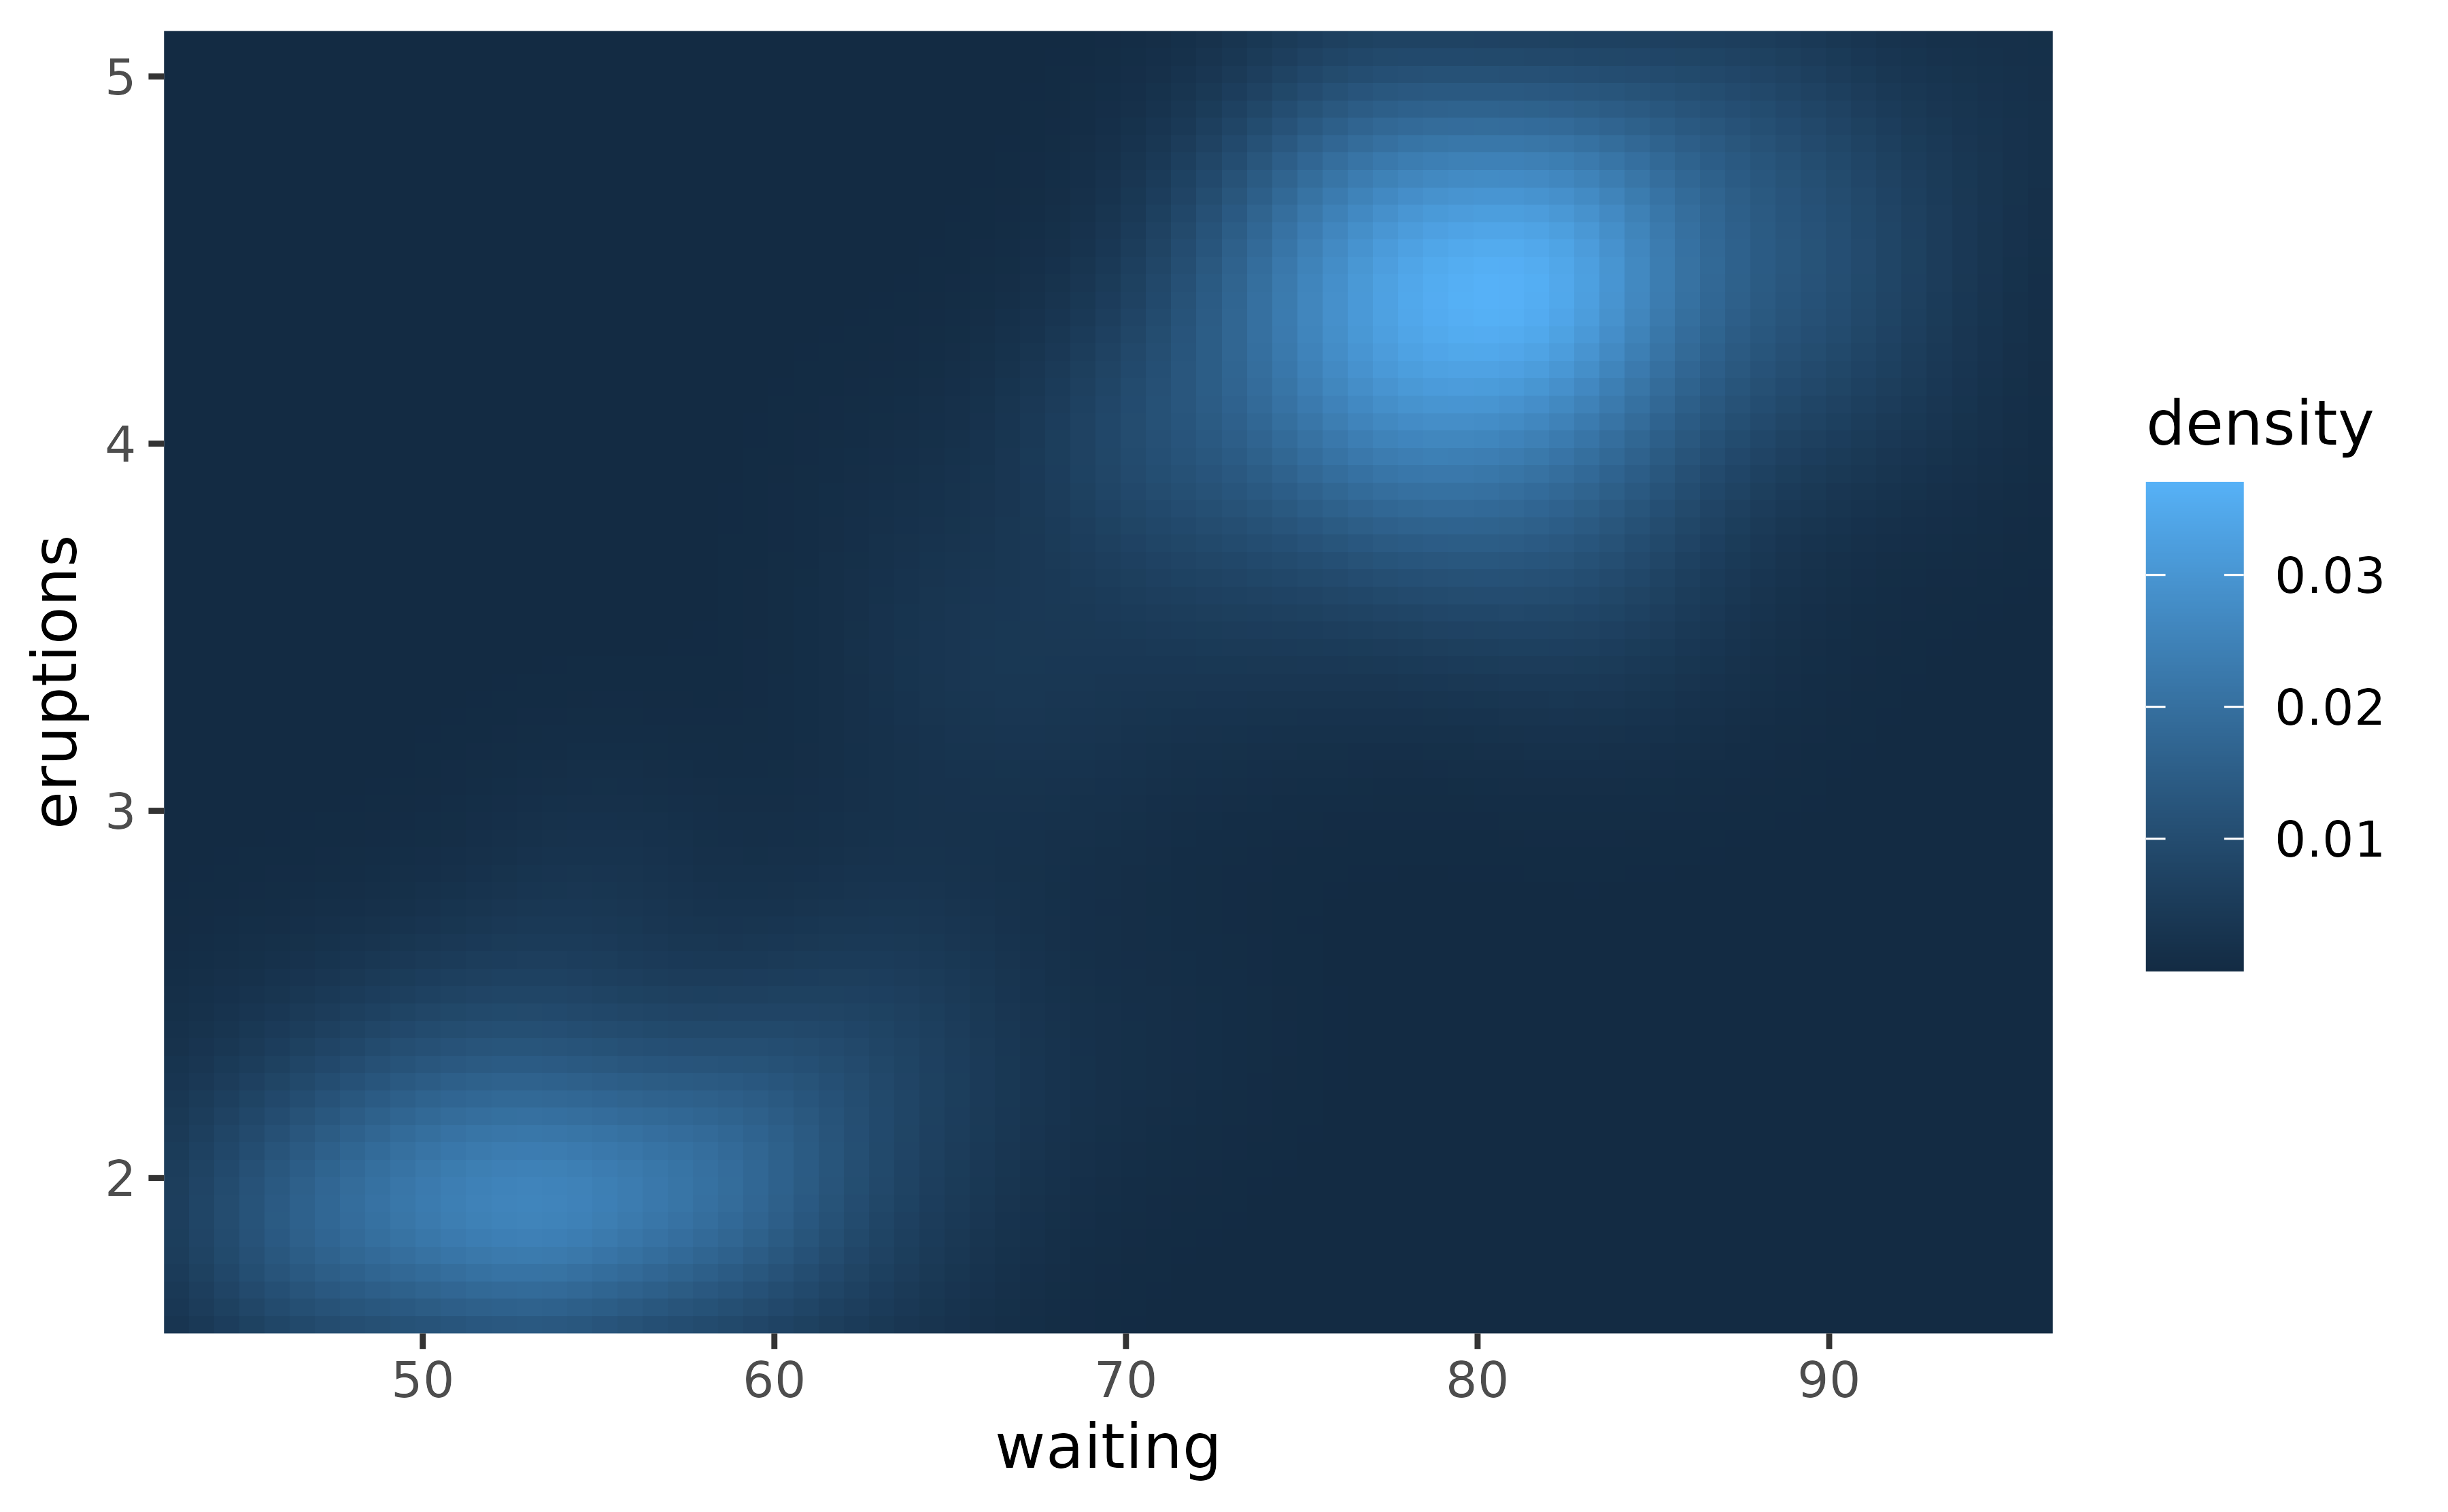 A heatmap showing a 2D density estimate of the waiting and eruption times of the Old Faithful geyser. The heatmap touches the panel edges.